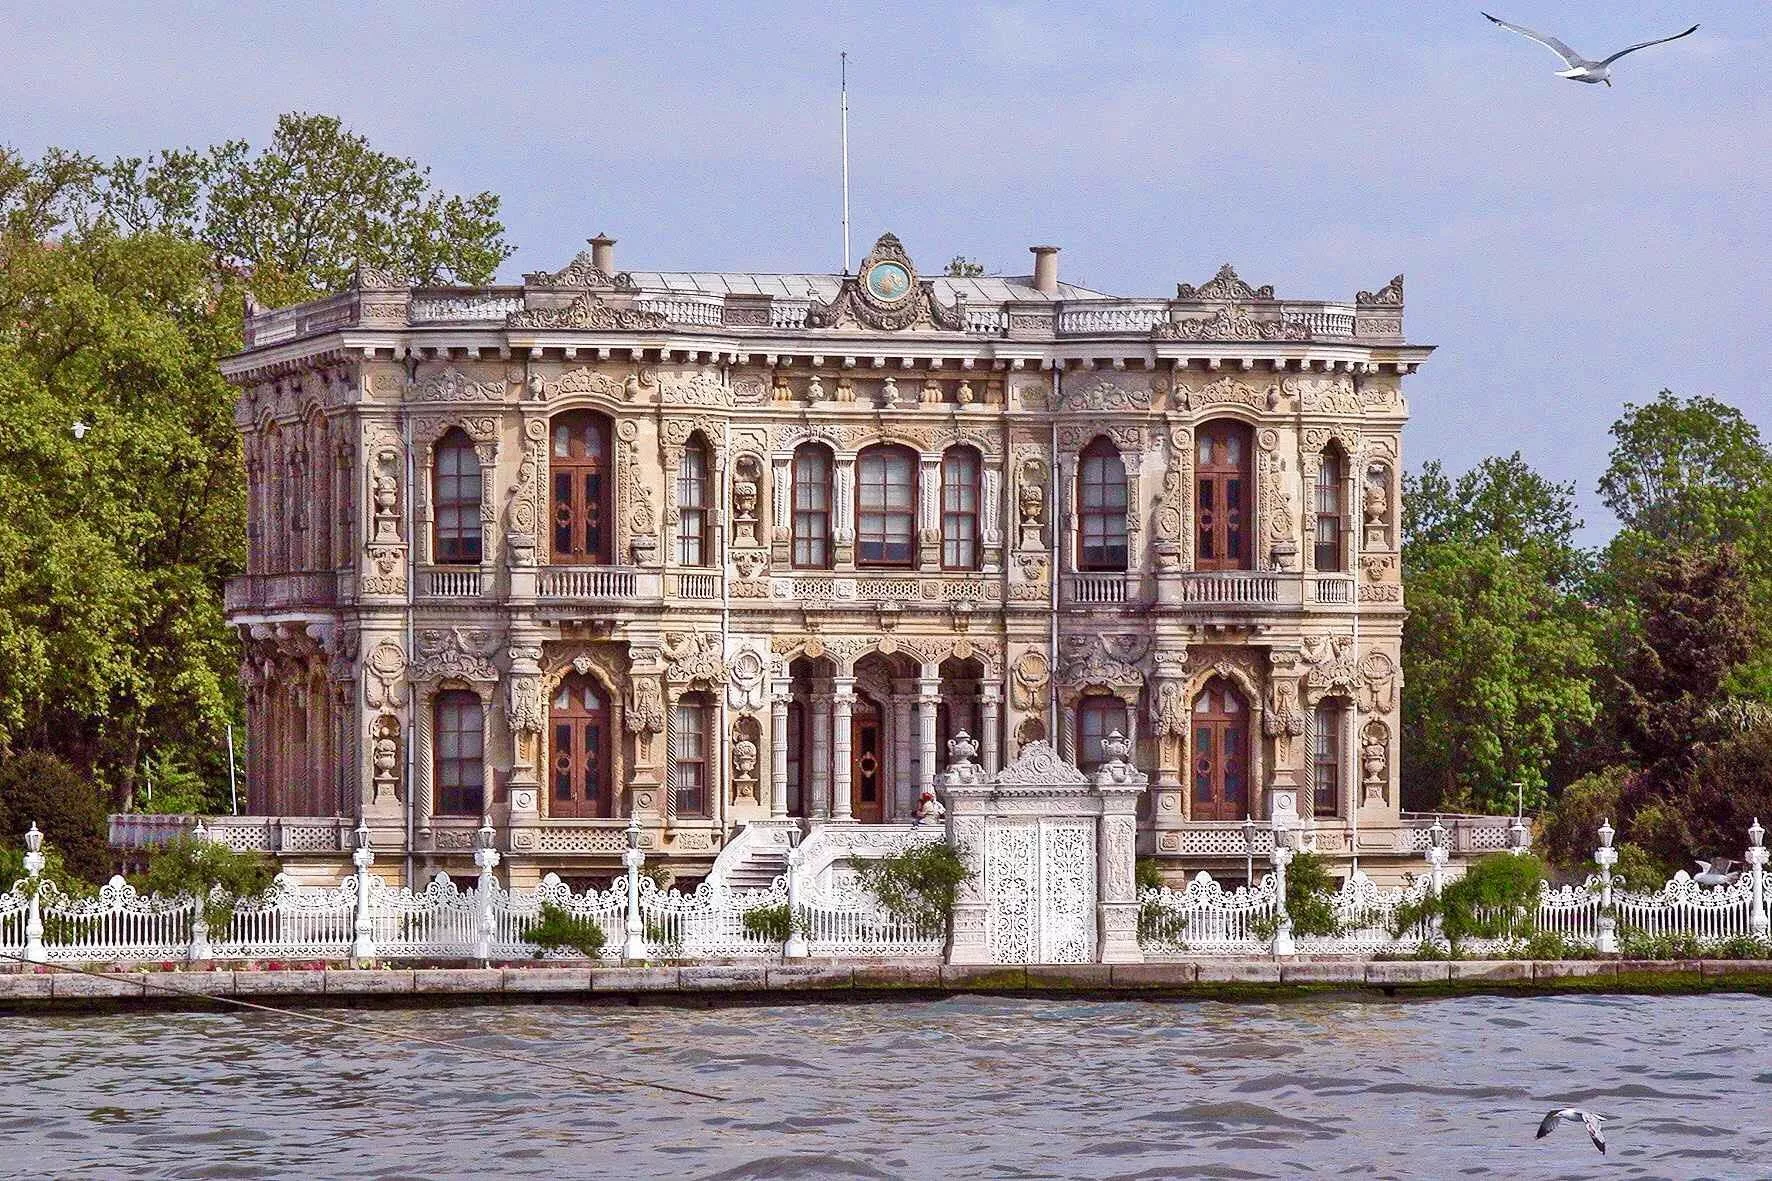 Beylerbeyi Palace in Turkey, Central Asia | Architecture - Rated 3.9